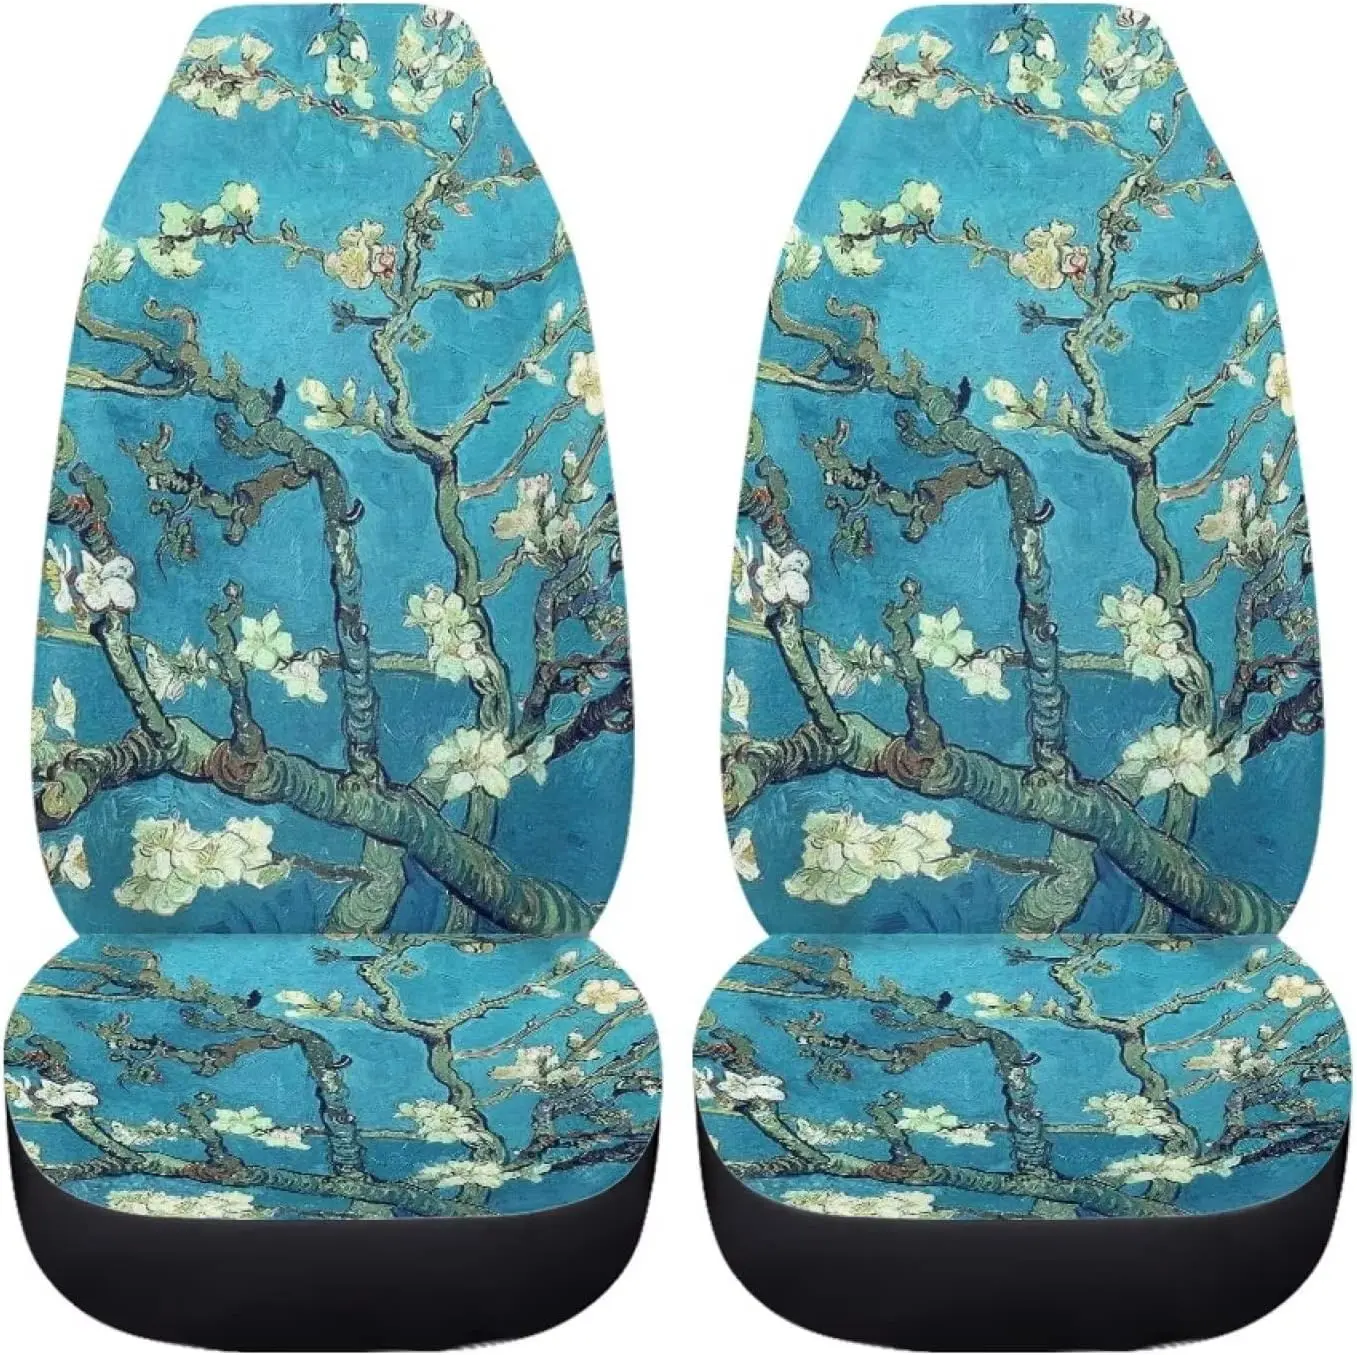 

Van Gogh Almond Blossom Flower Car Seat Covers for Women Car Seat Mat Covers Protector Cushion Universal Fit Sedan Truck SUV